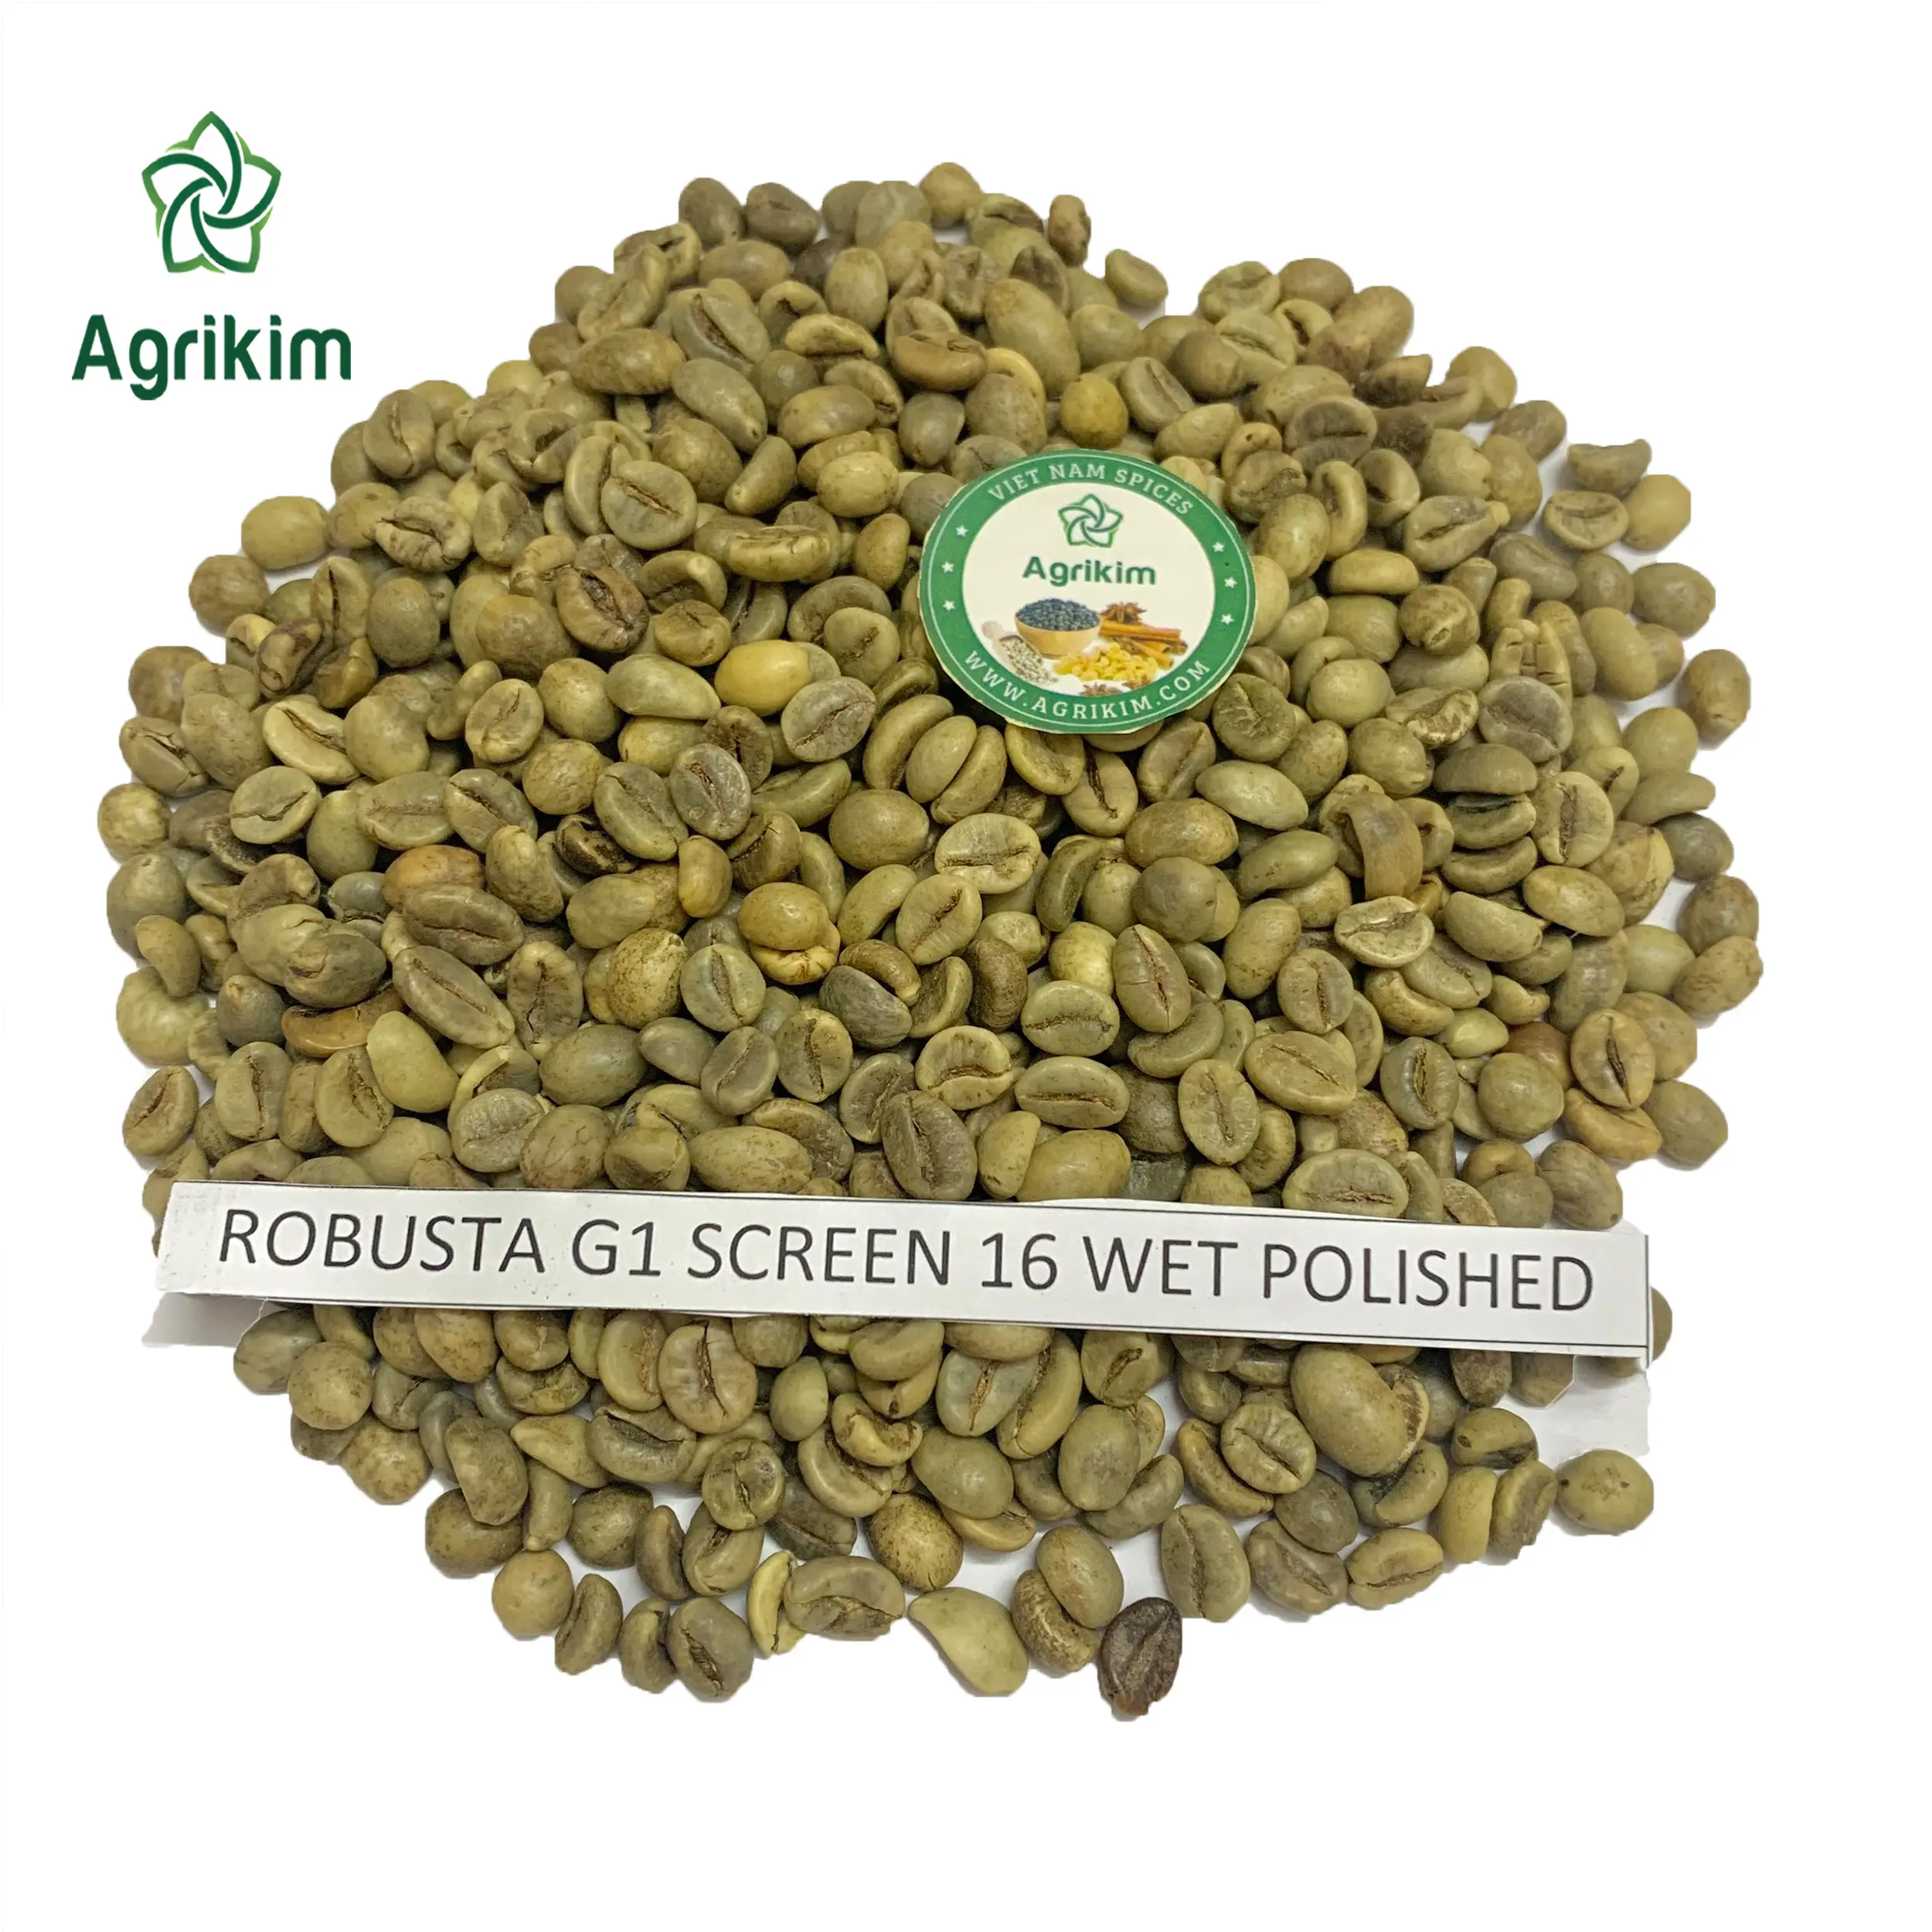 THE BEST FOR EXPORT ROBUSTA GREEN COFFEE BEANS ARABICA GREEN COFFEE BEANS WITH HIGH QUALITY FROM VIETNAM ORIGIN +84363565928